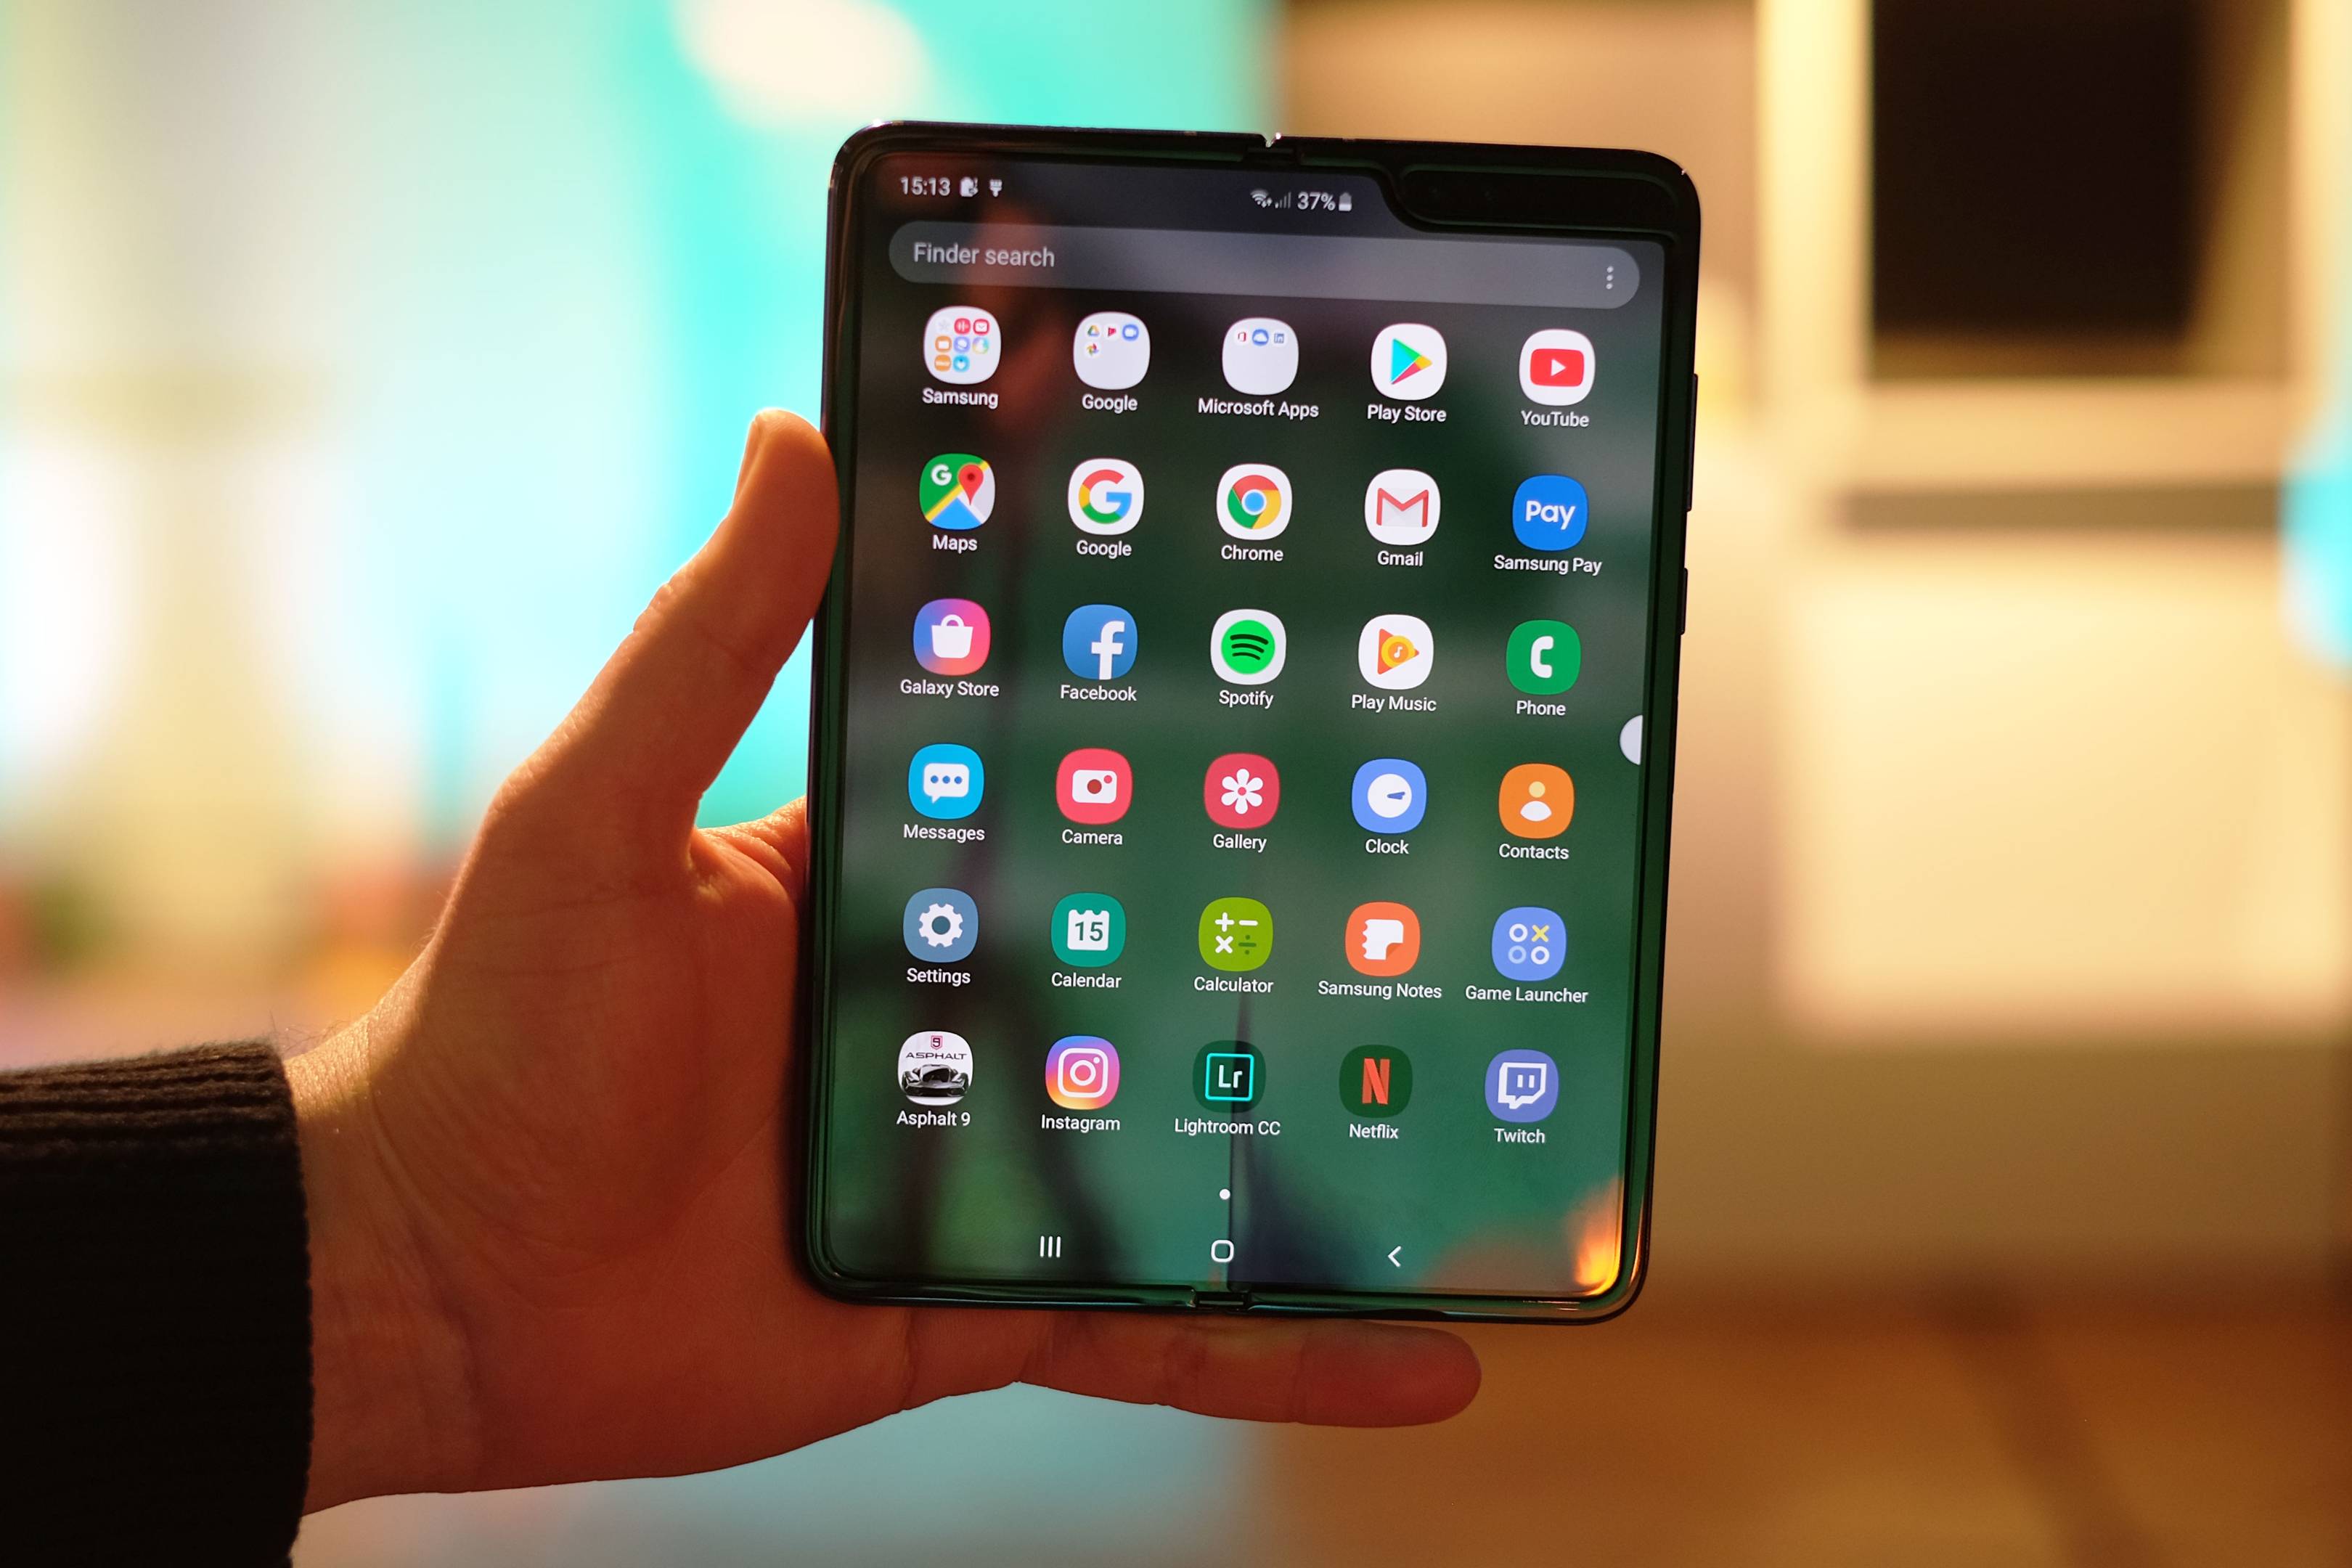 Galaxy Fold gets first official update, improves cameras drastically